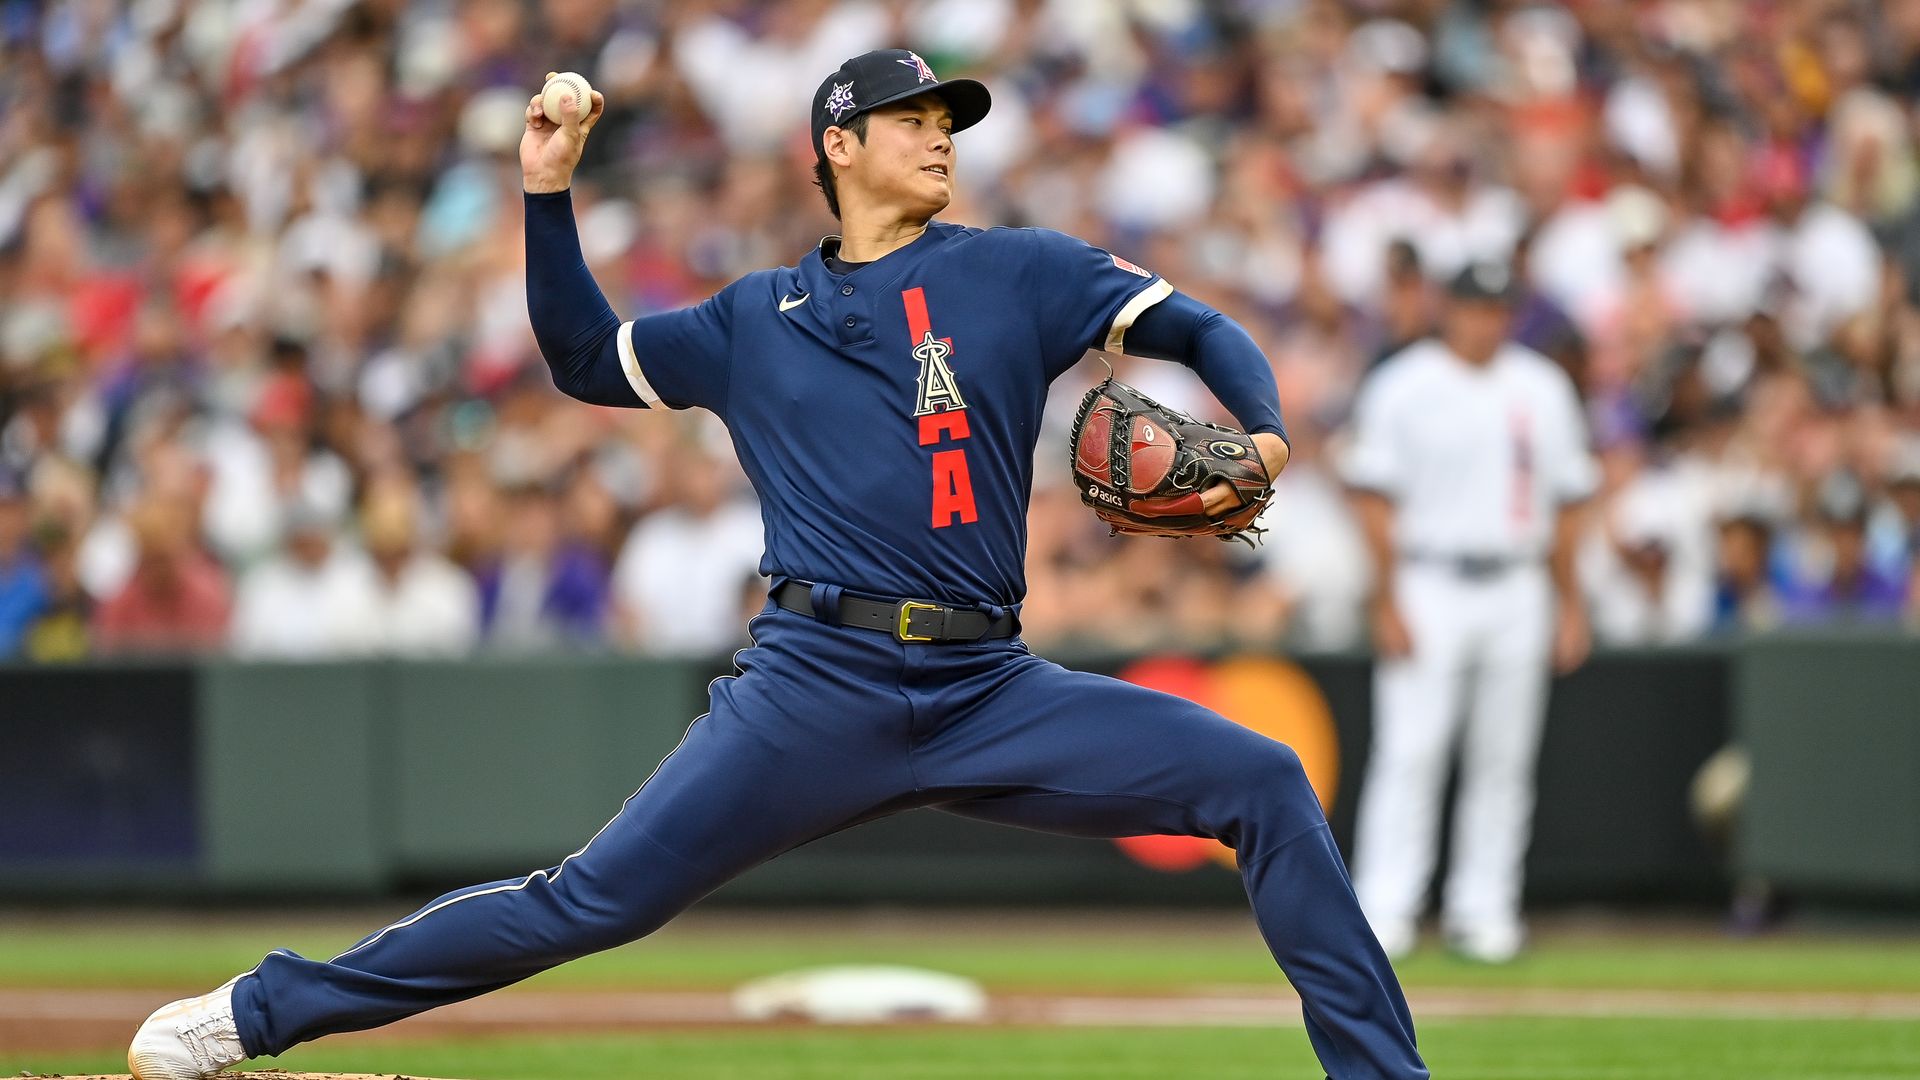 Shohei Ohtani #17 of the Los Angeles Angels pitches against the National League during the 91st MLB All-Star Game 